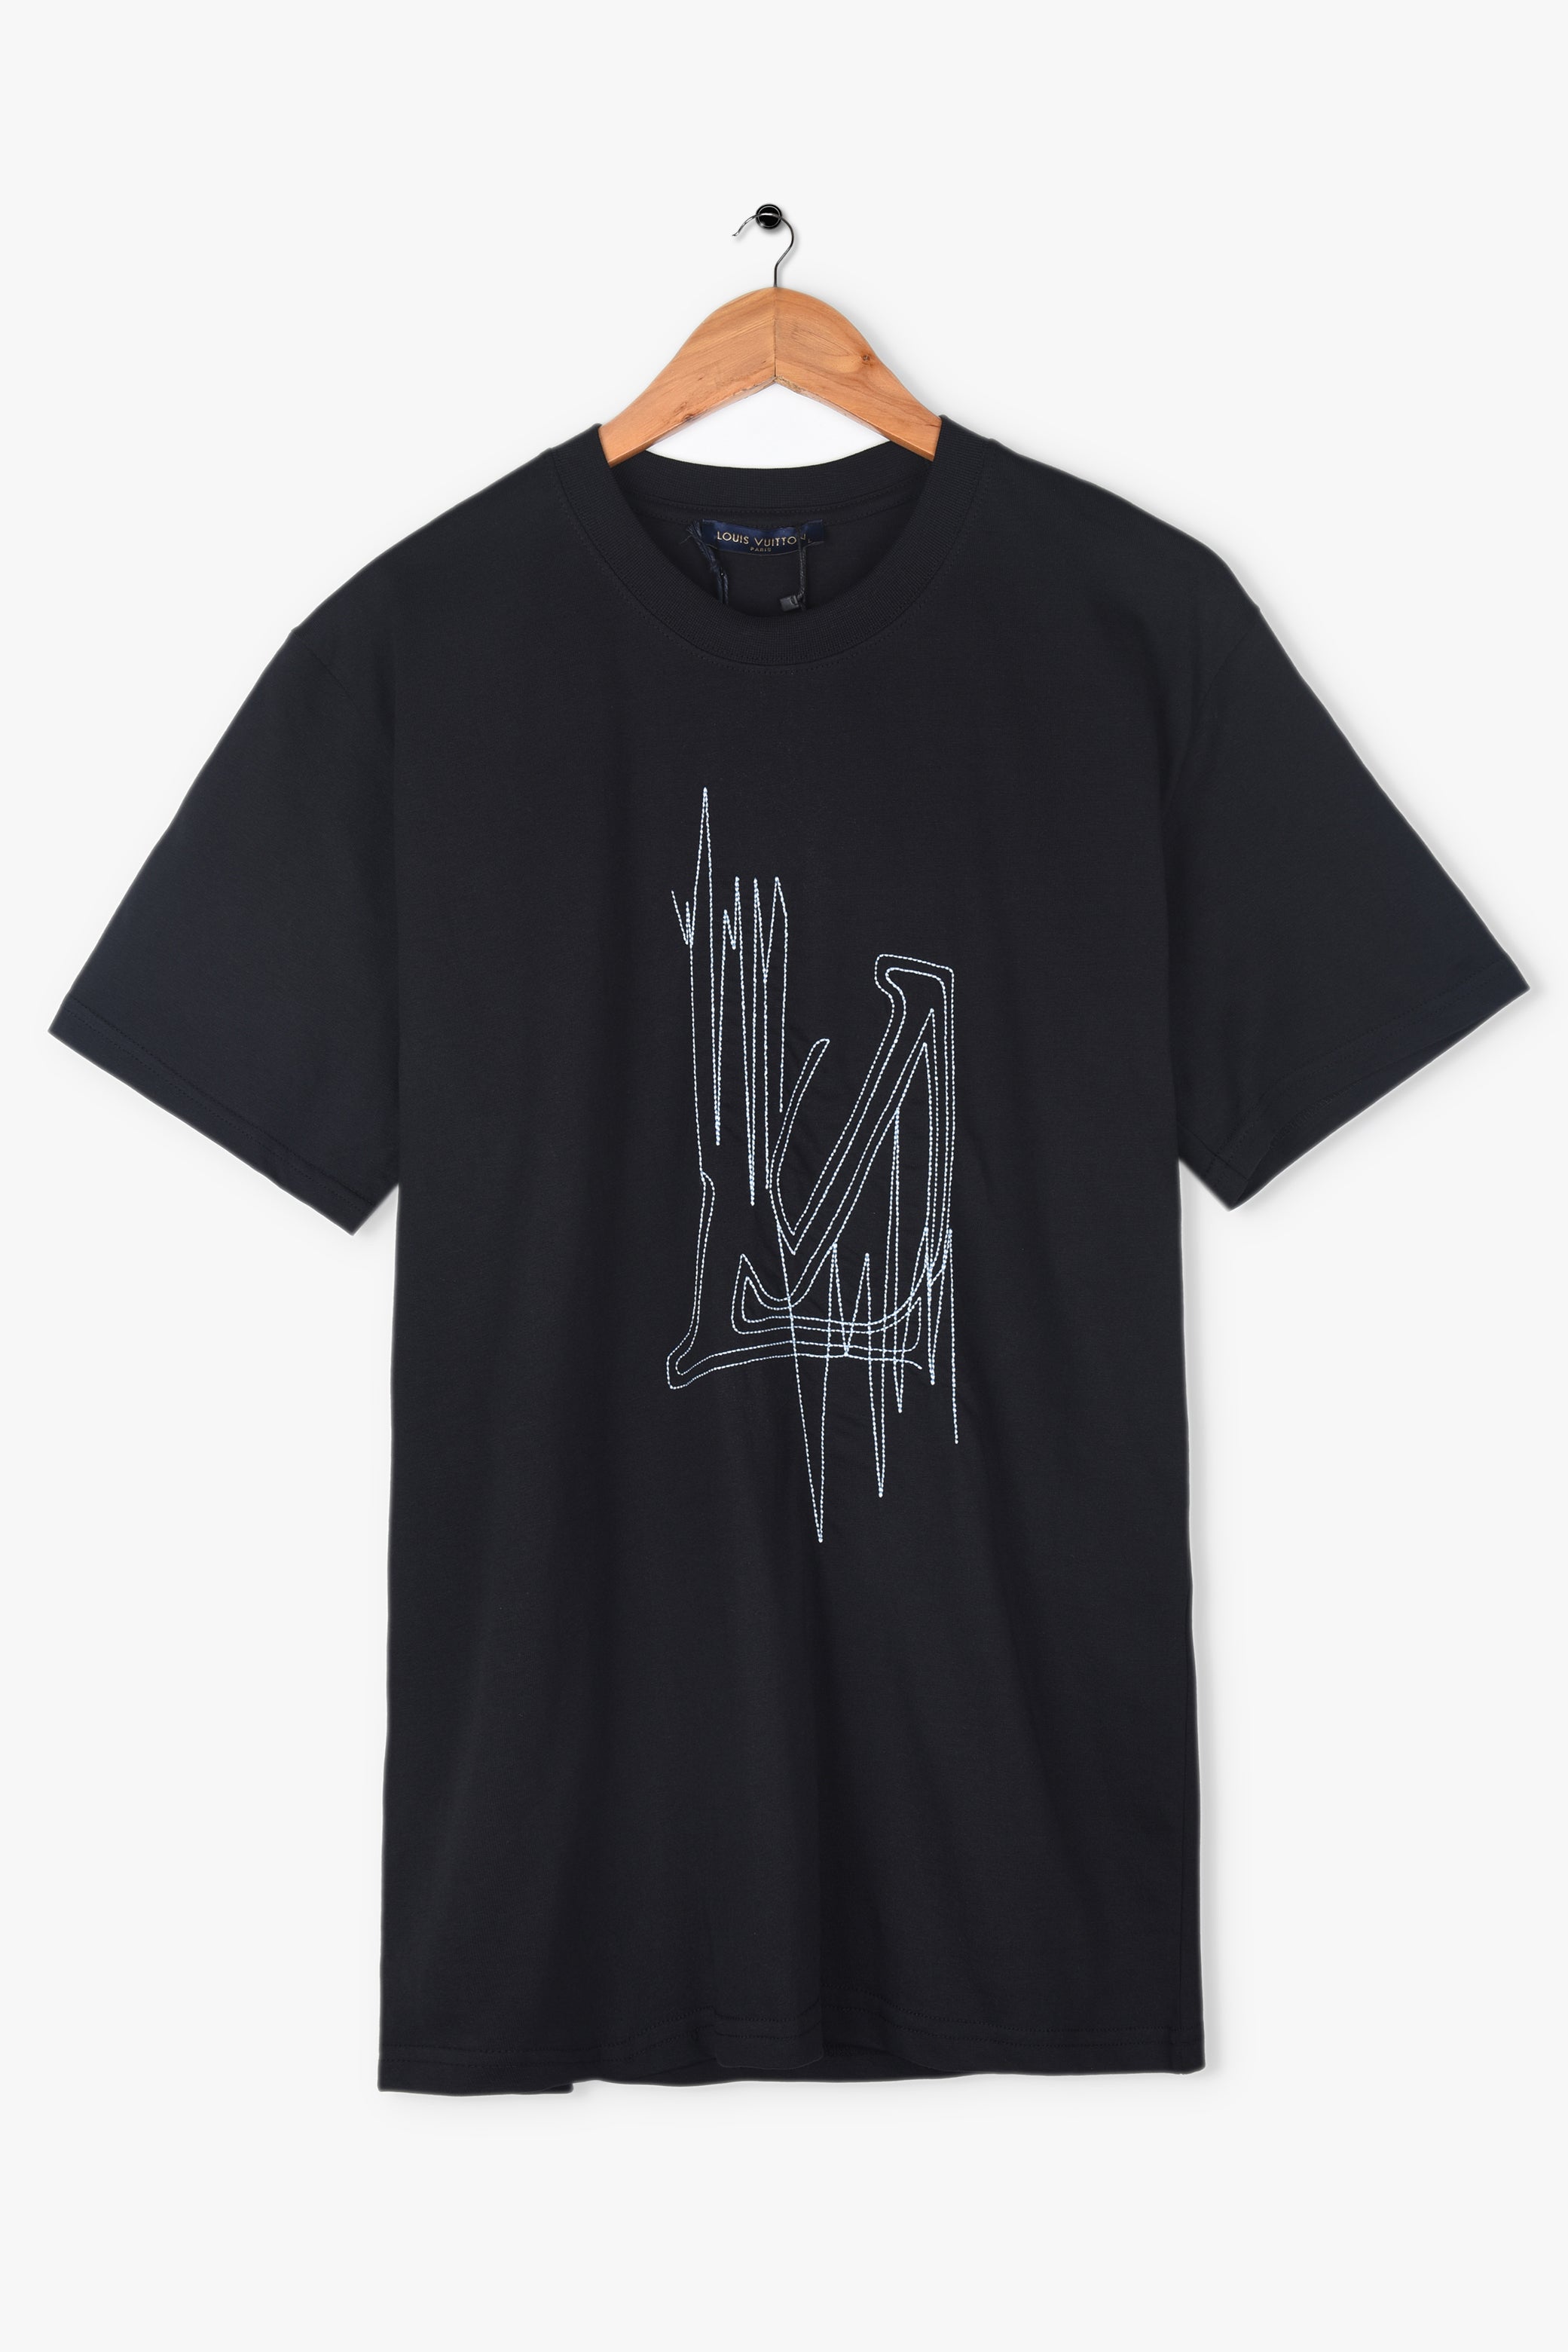 LV Frequency Graphic T-Shirt - Ready-to-Wear